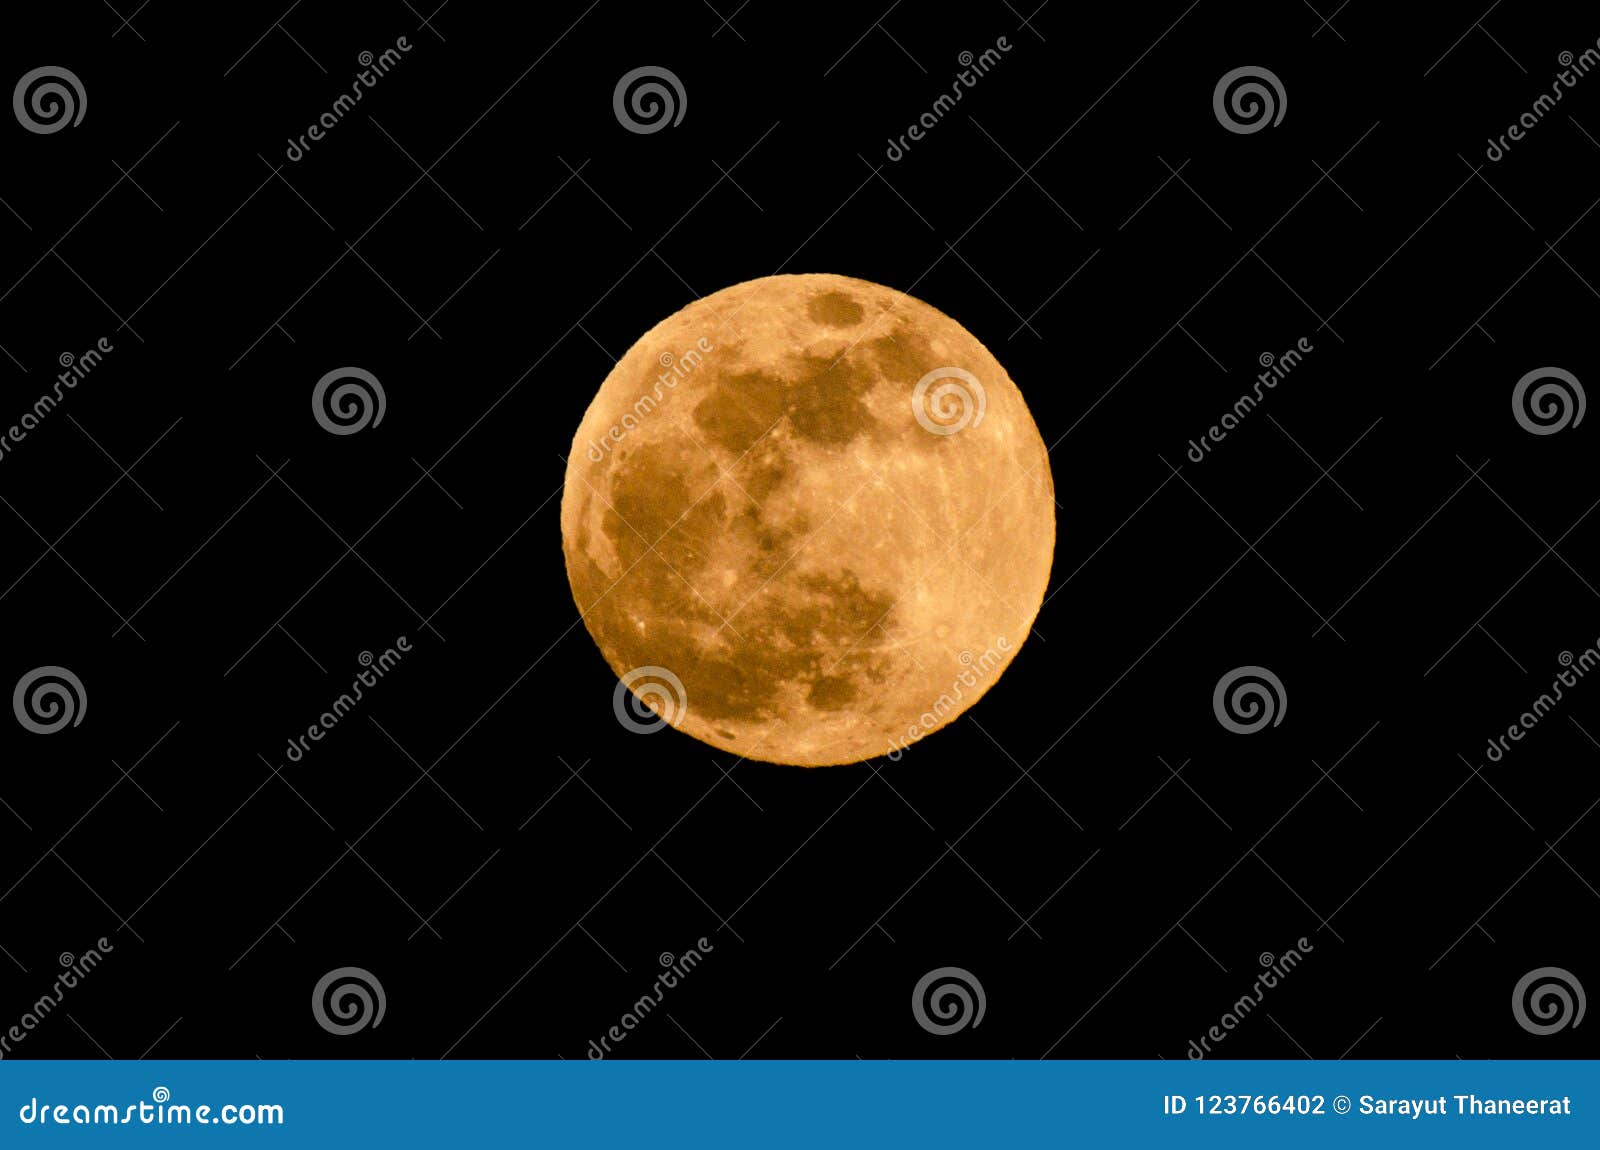 The Yellow Full Moon on Black Background Stock Photo - Image of cycle ...